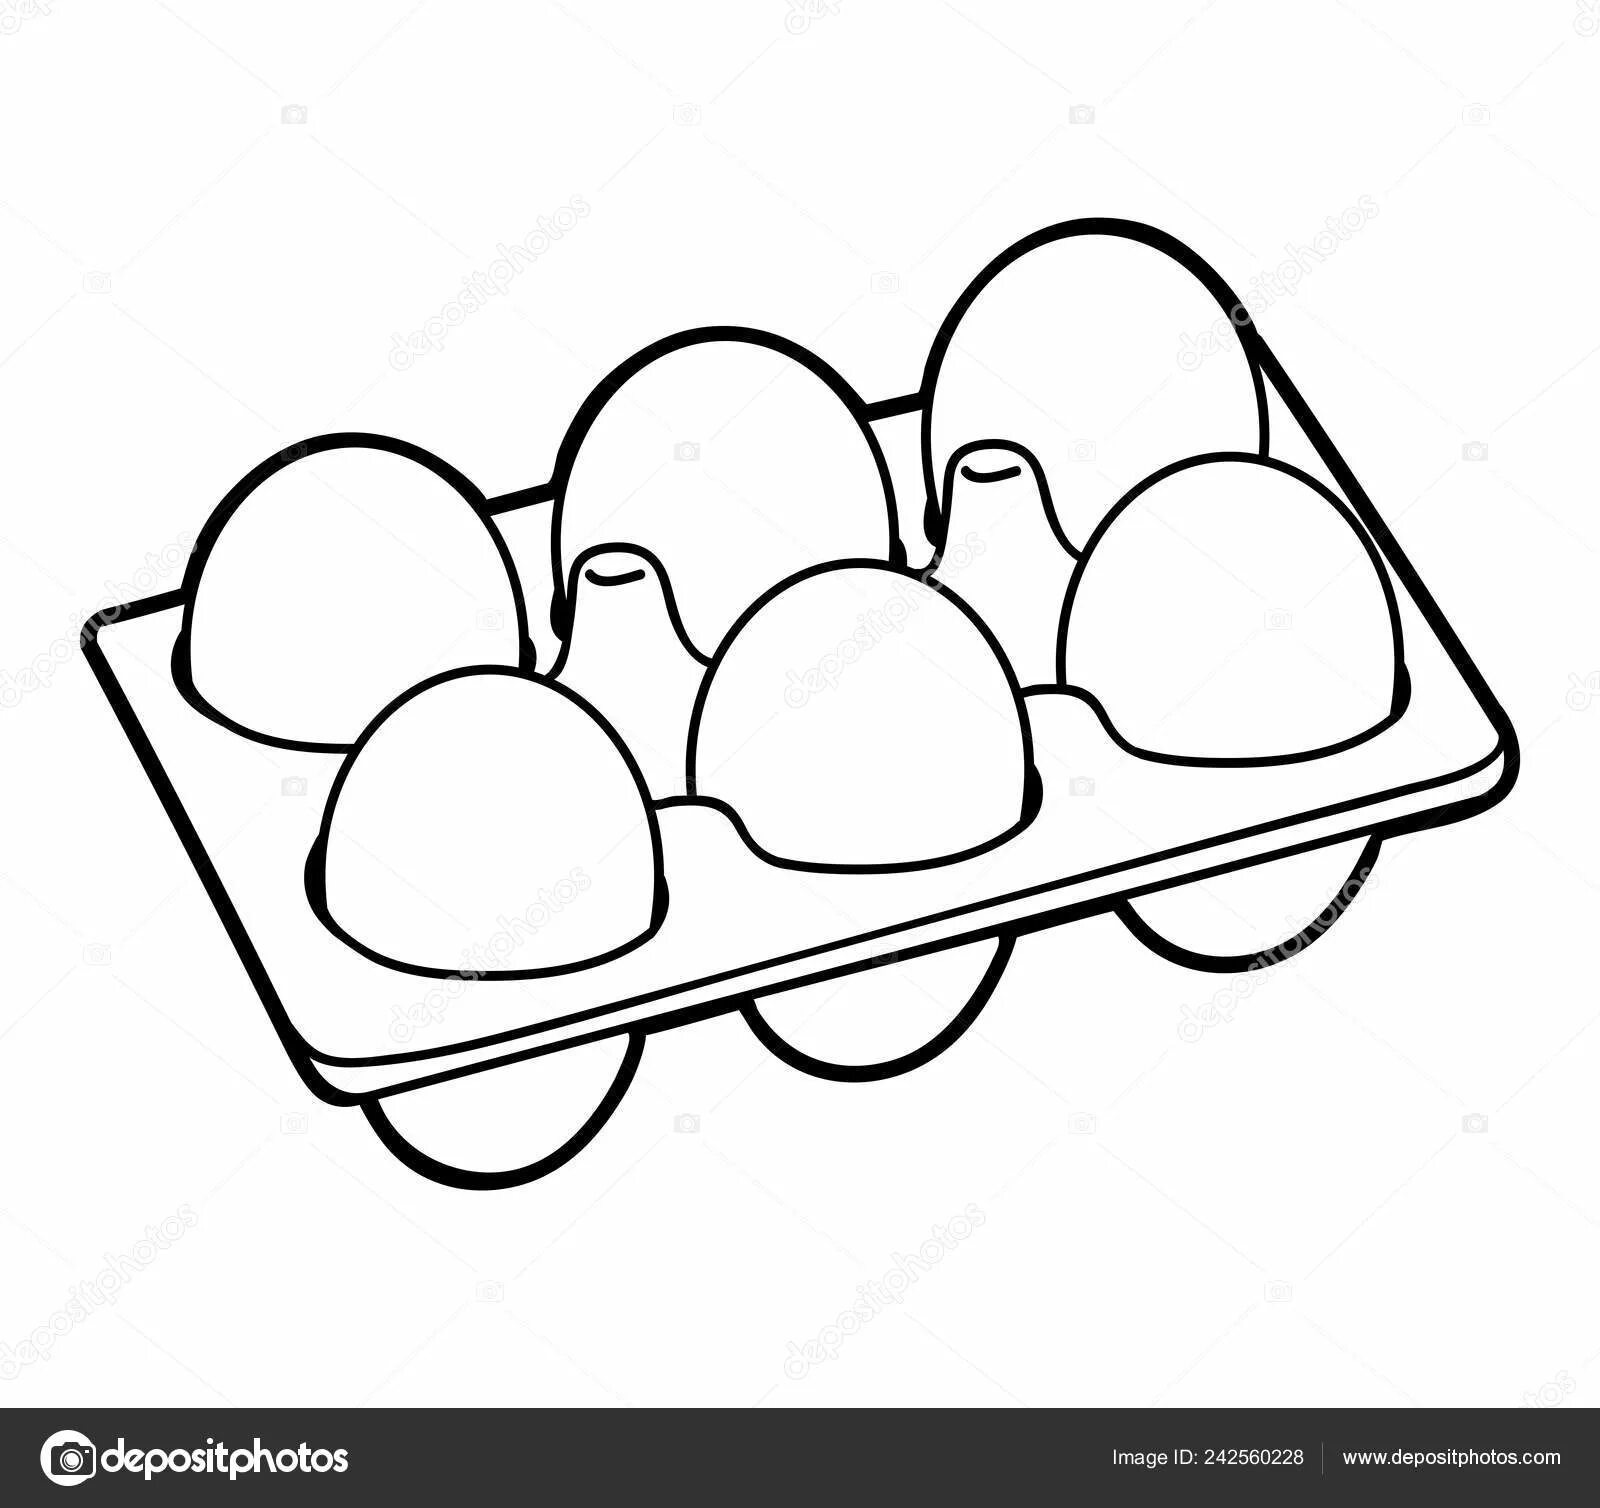 Great chicken egg coloring page